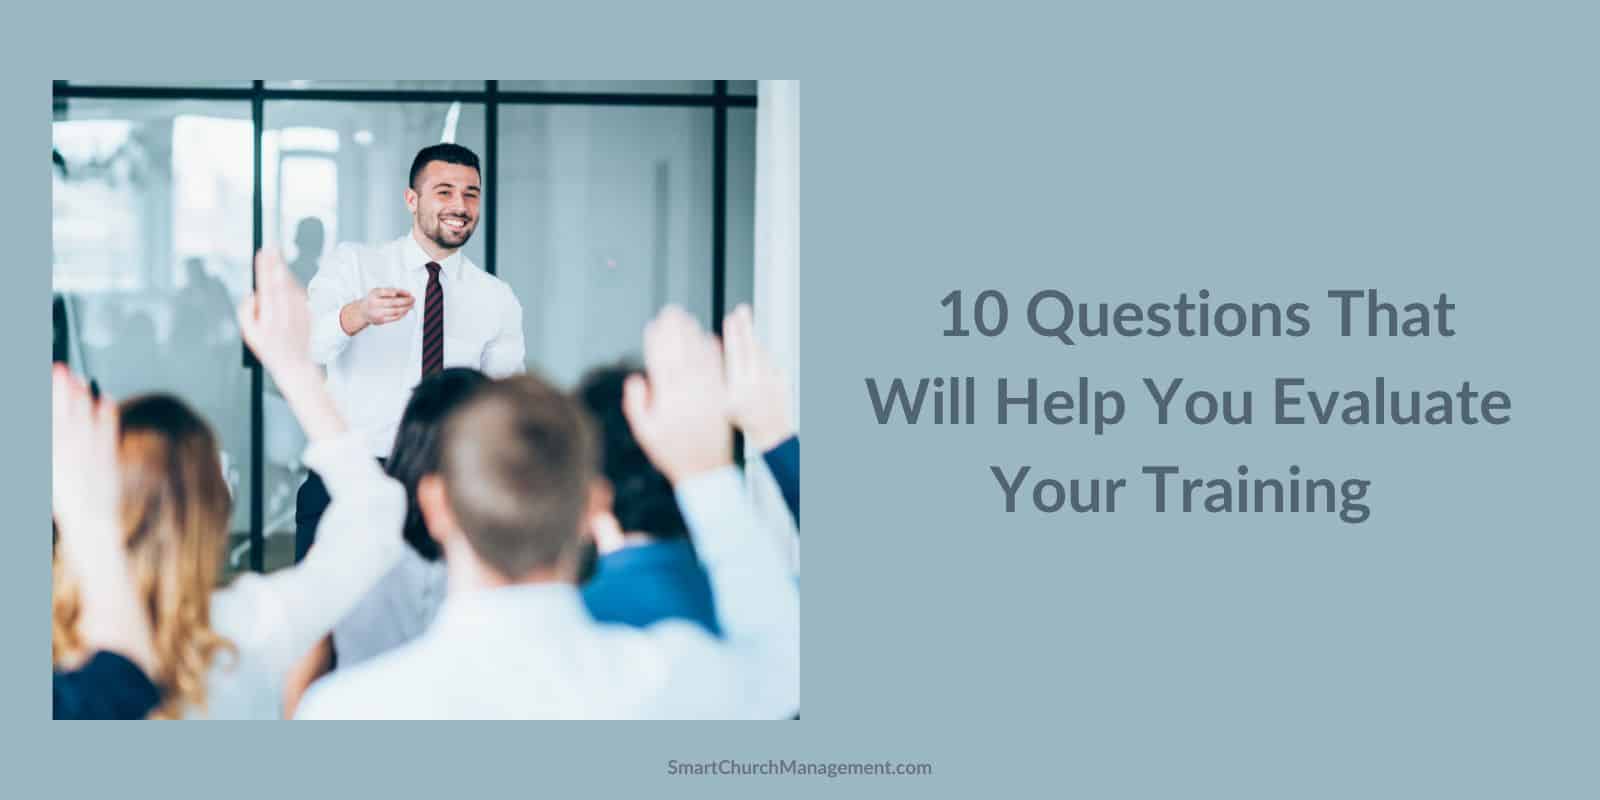 Ask these questions to evaluate your training